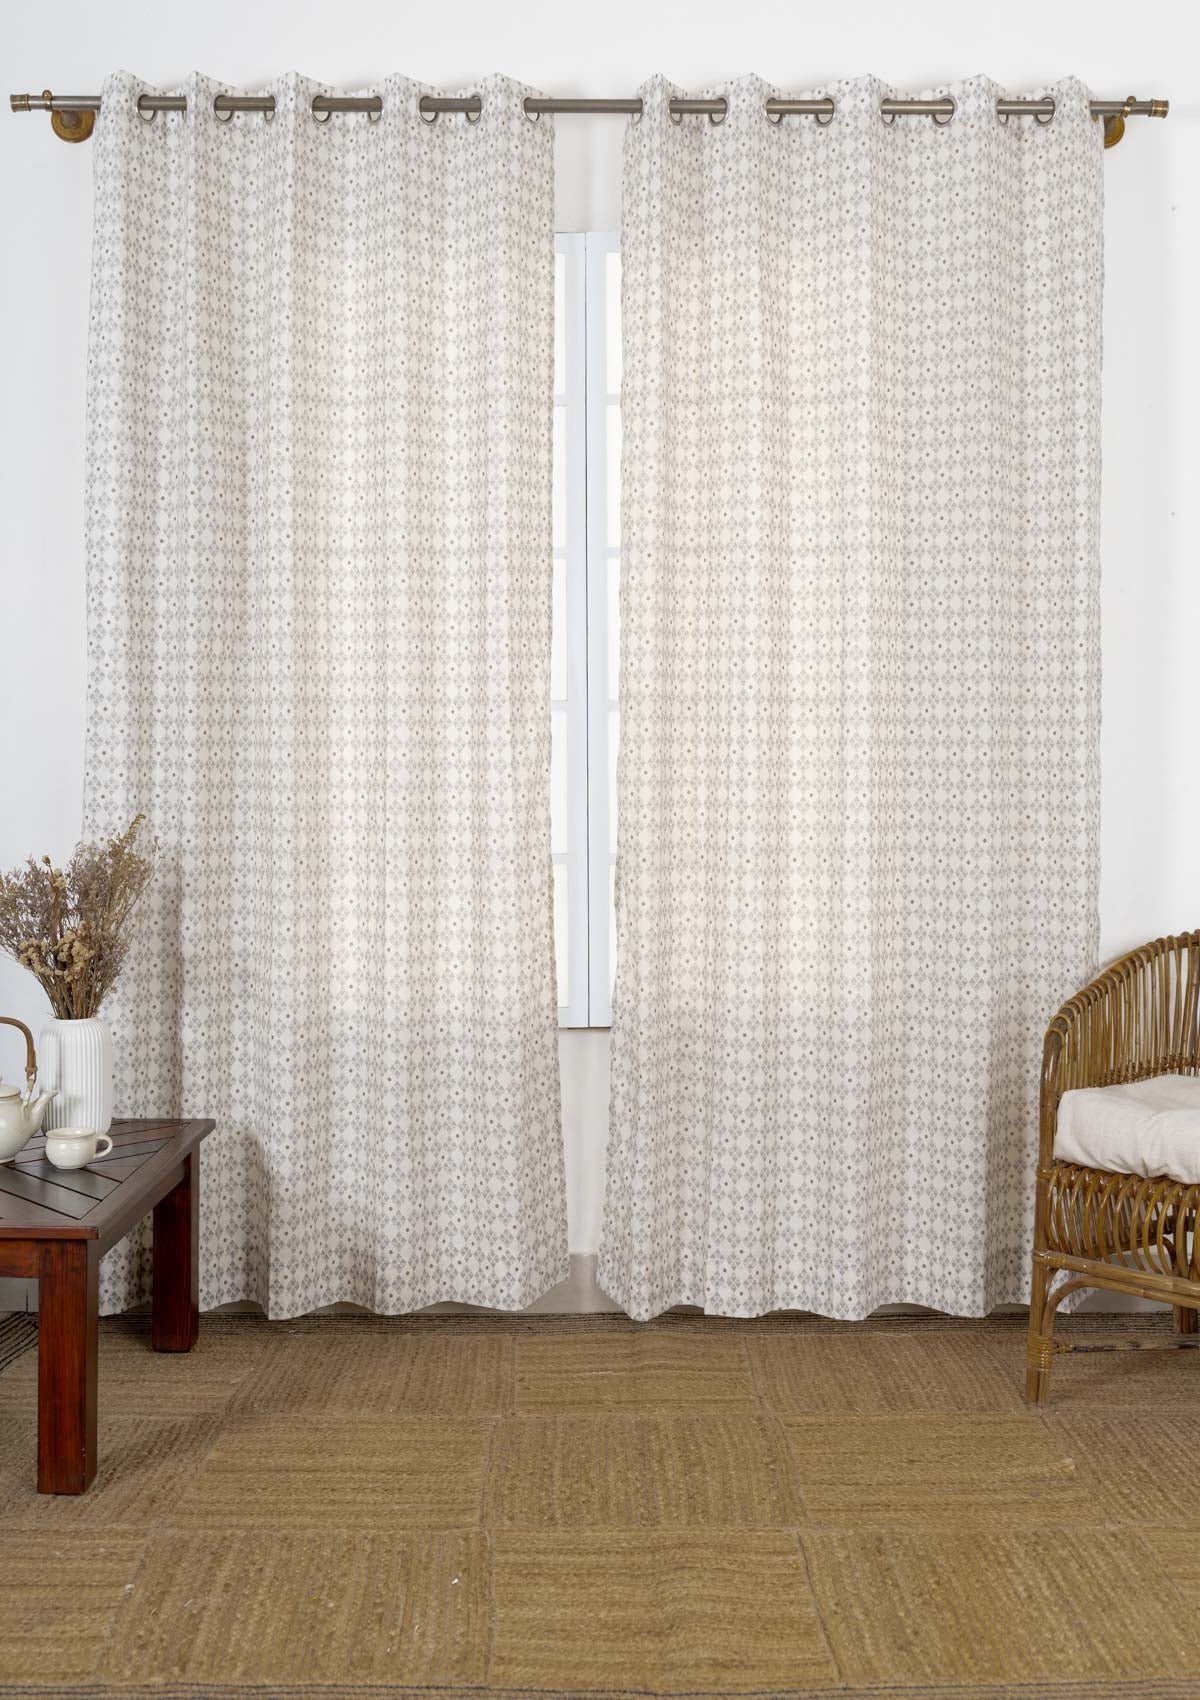 Mirage 100% cotton geometric sheer customisable curtain for living room - Light filtering - Grey